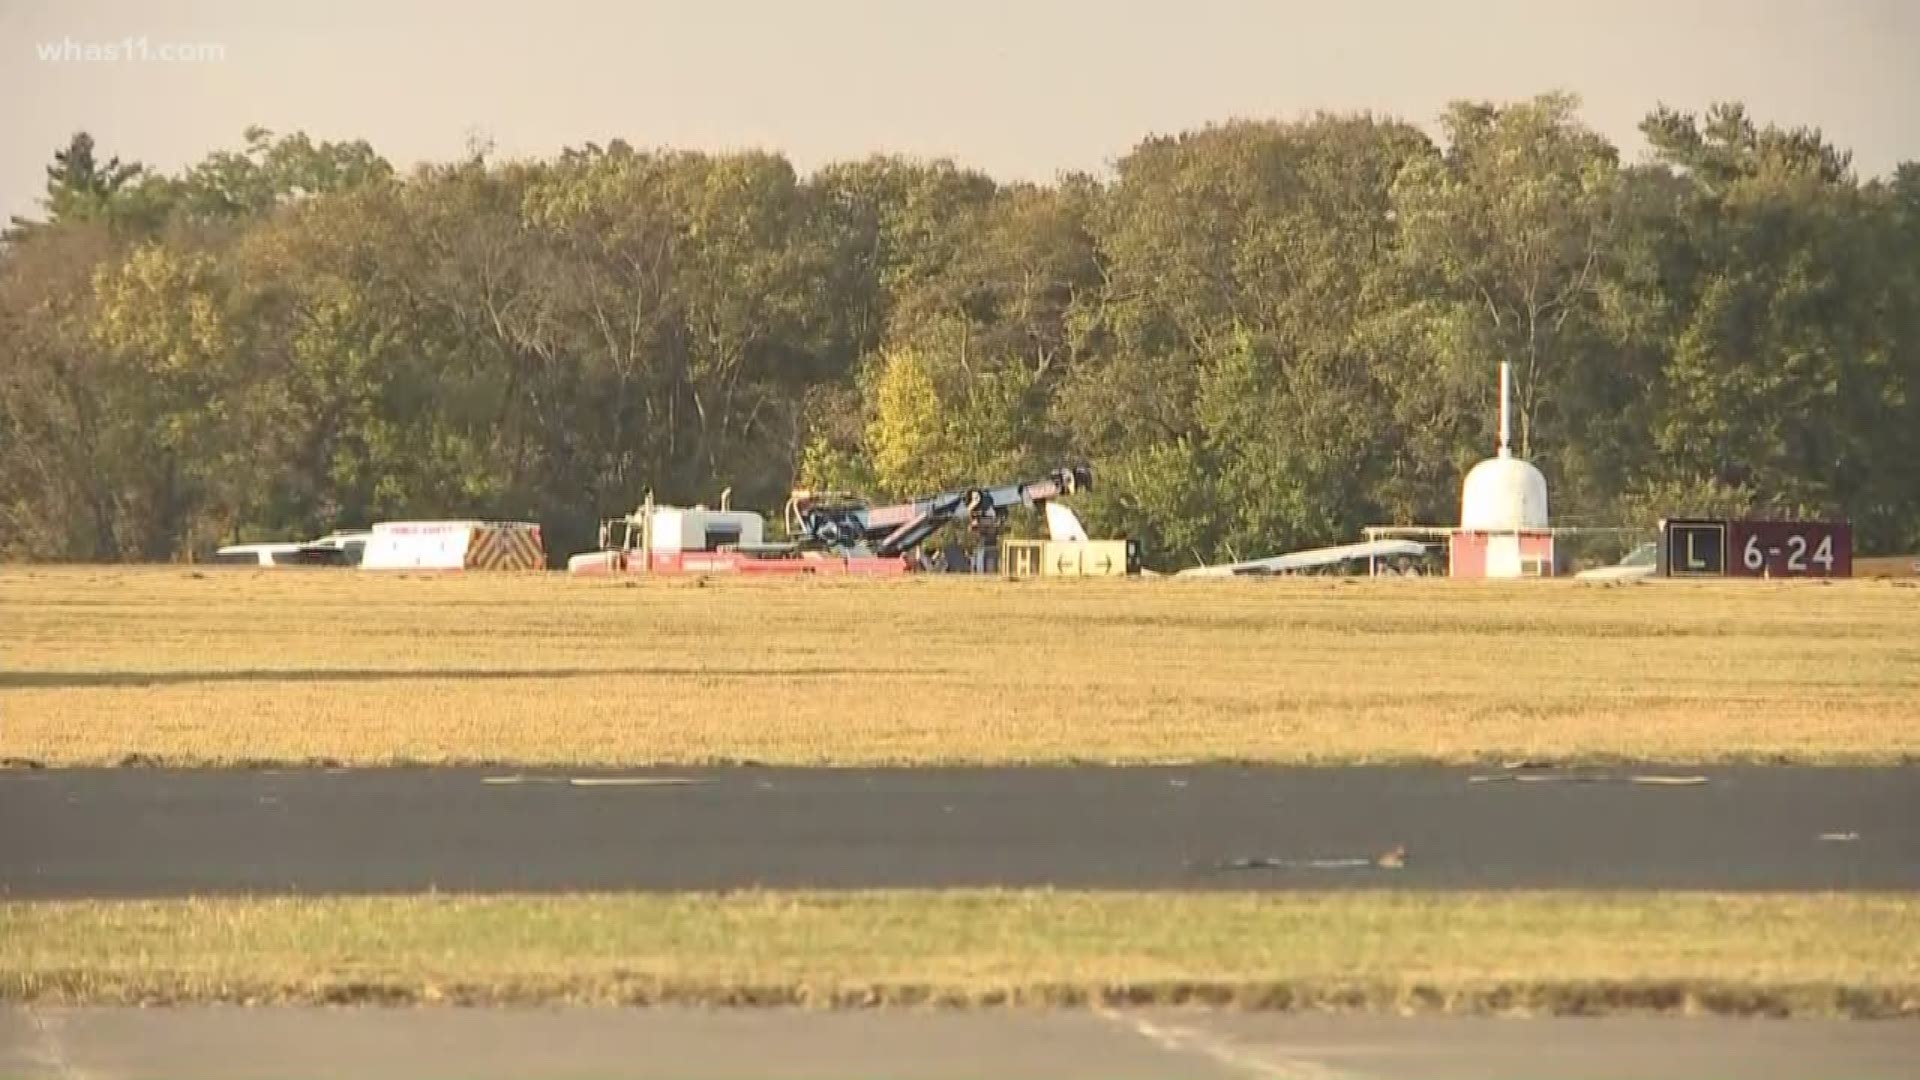 According to authorities, it is unclear of how many people are aboard the small aircraft.